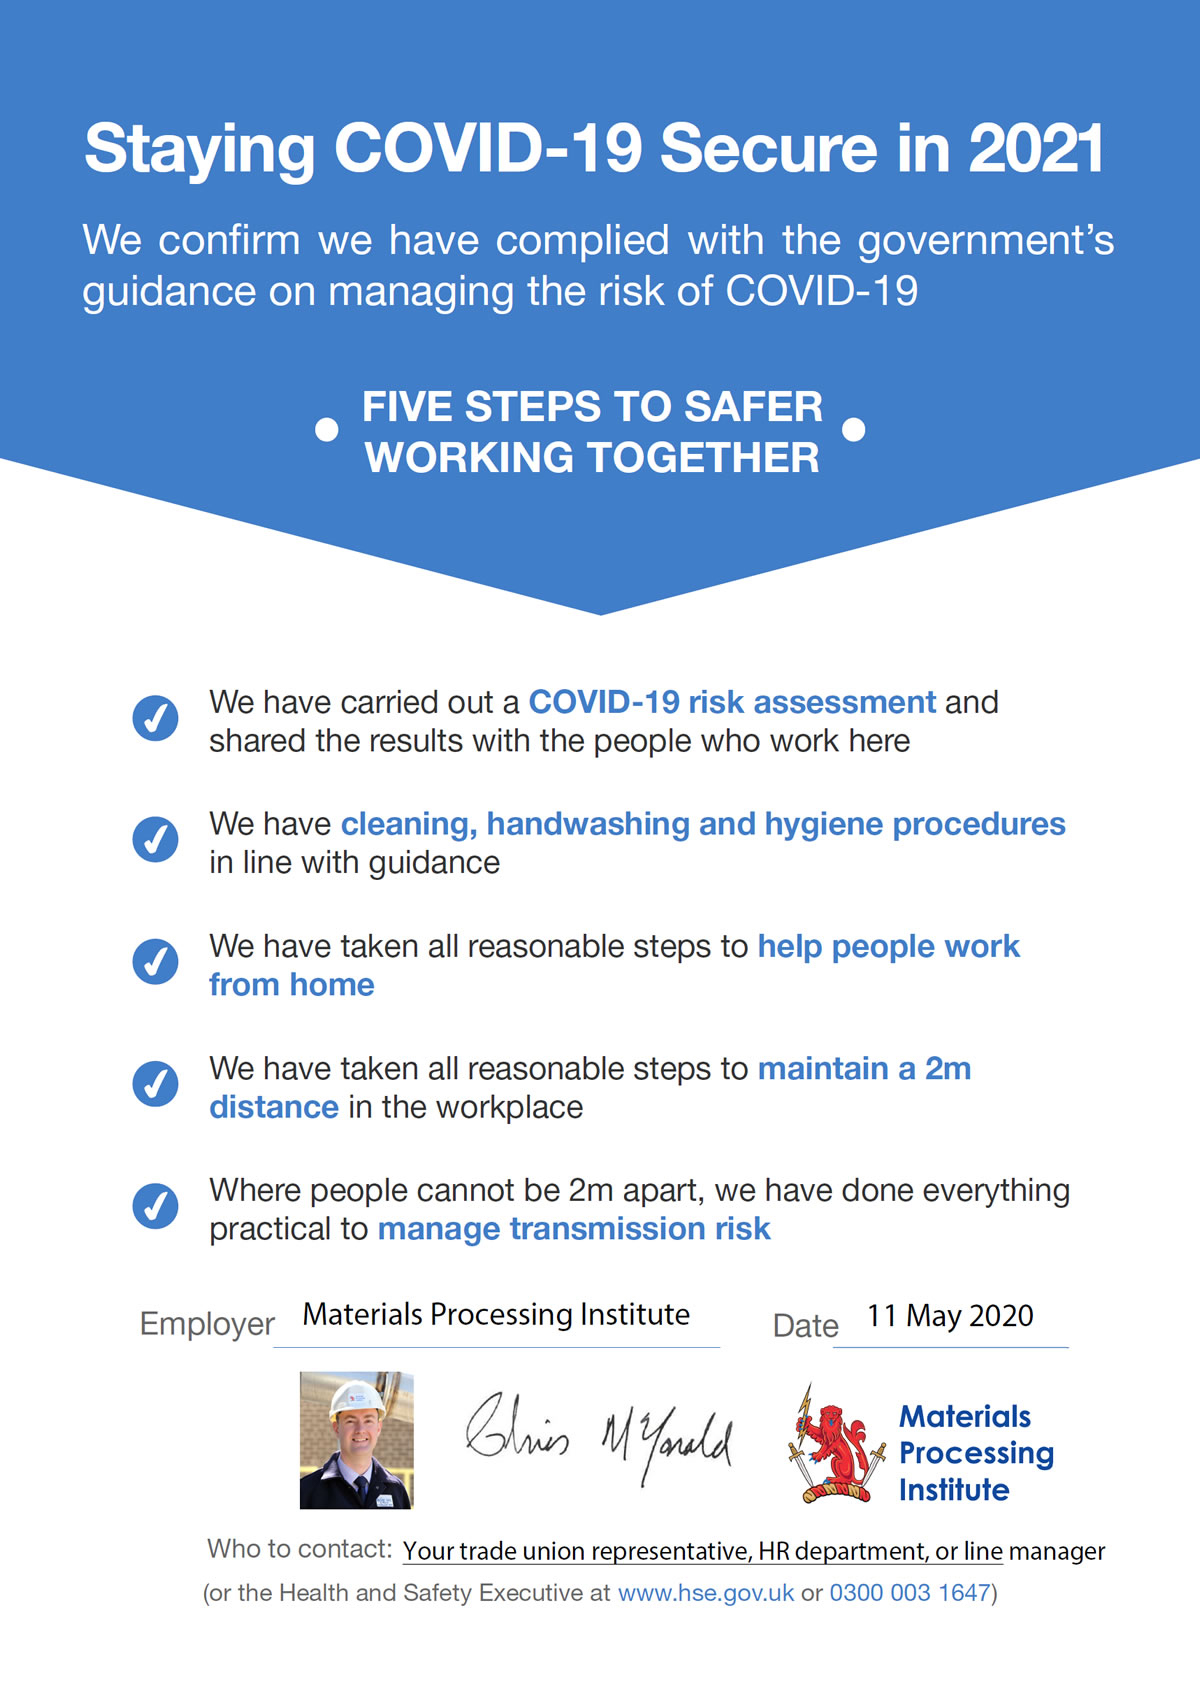 Staying Covid-19 Secure in 2020